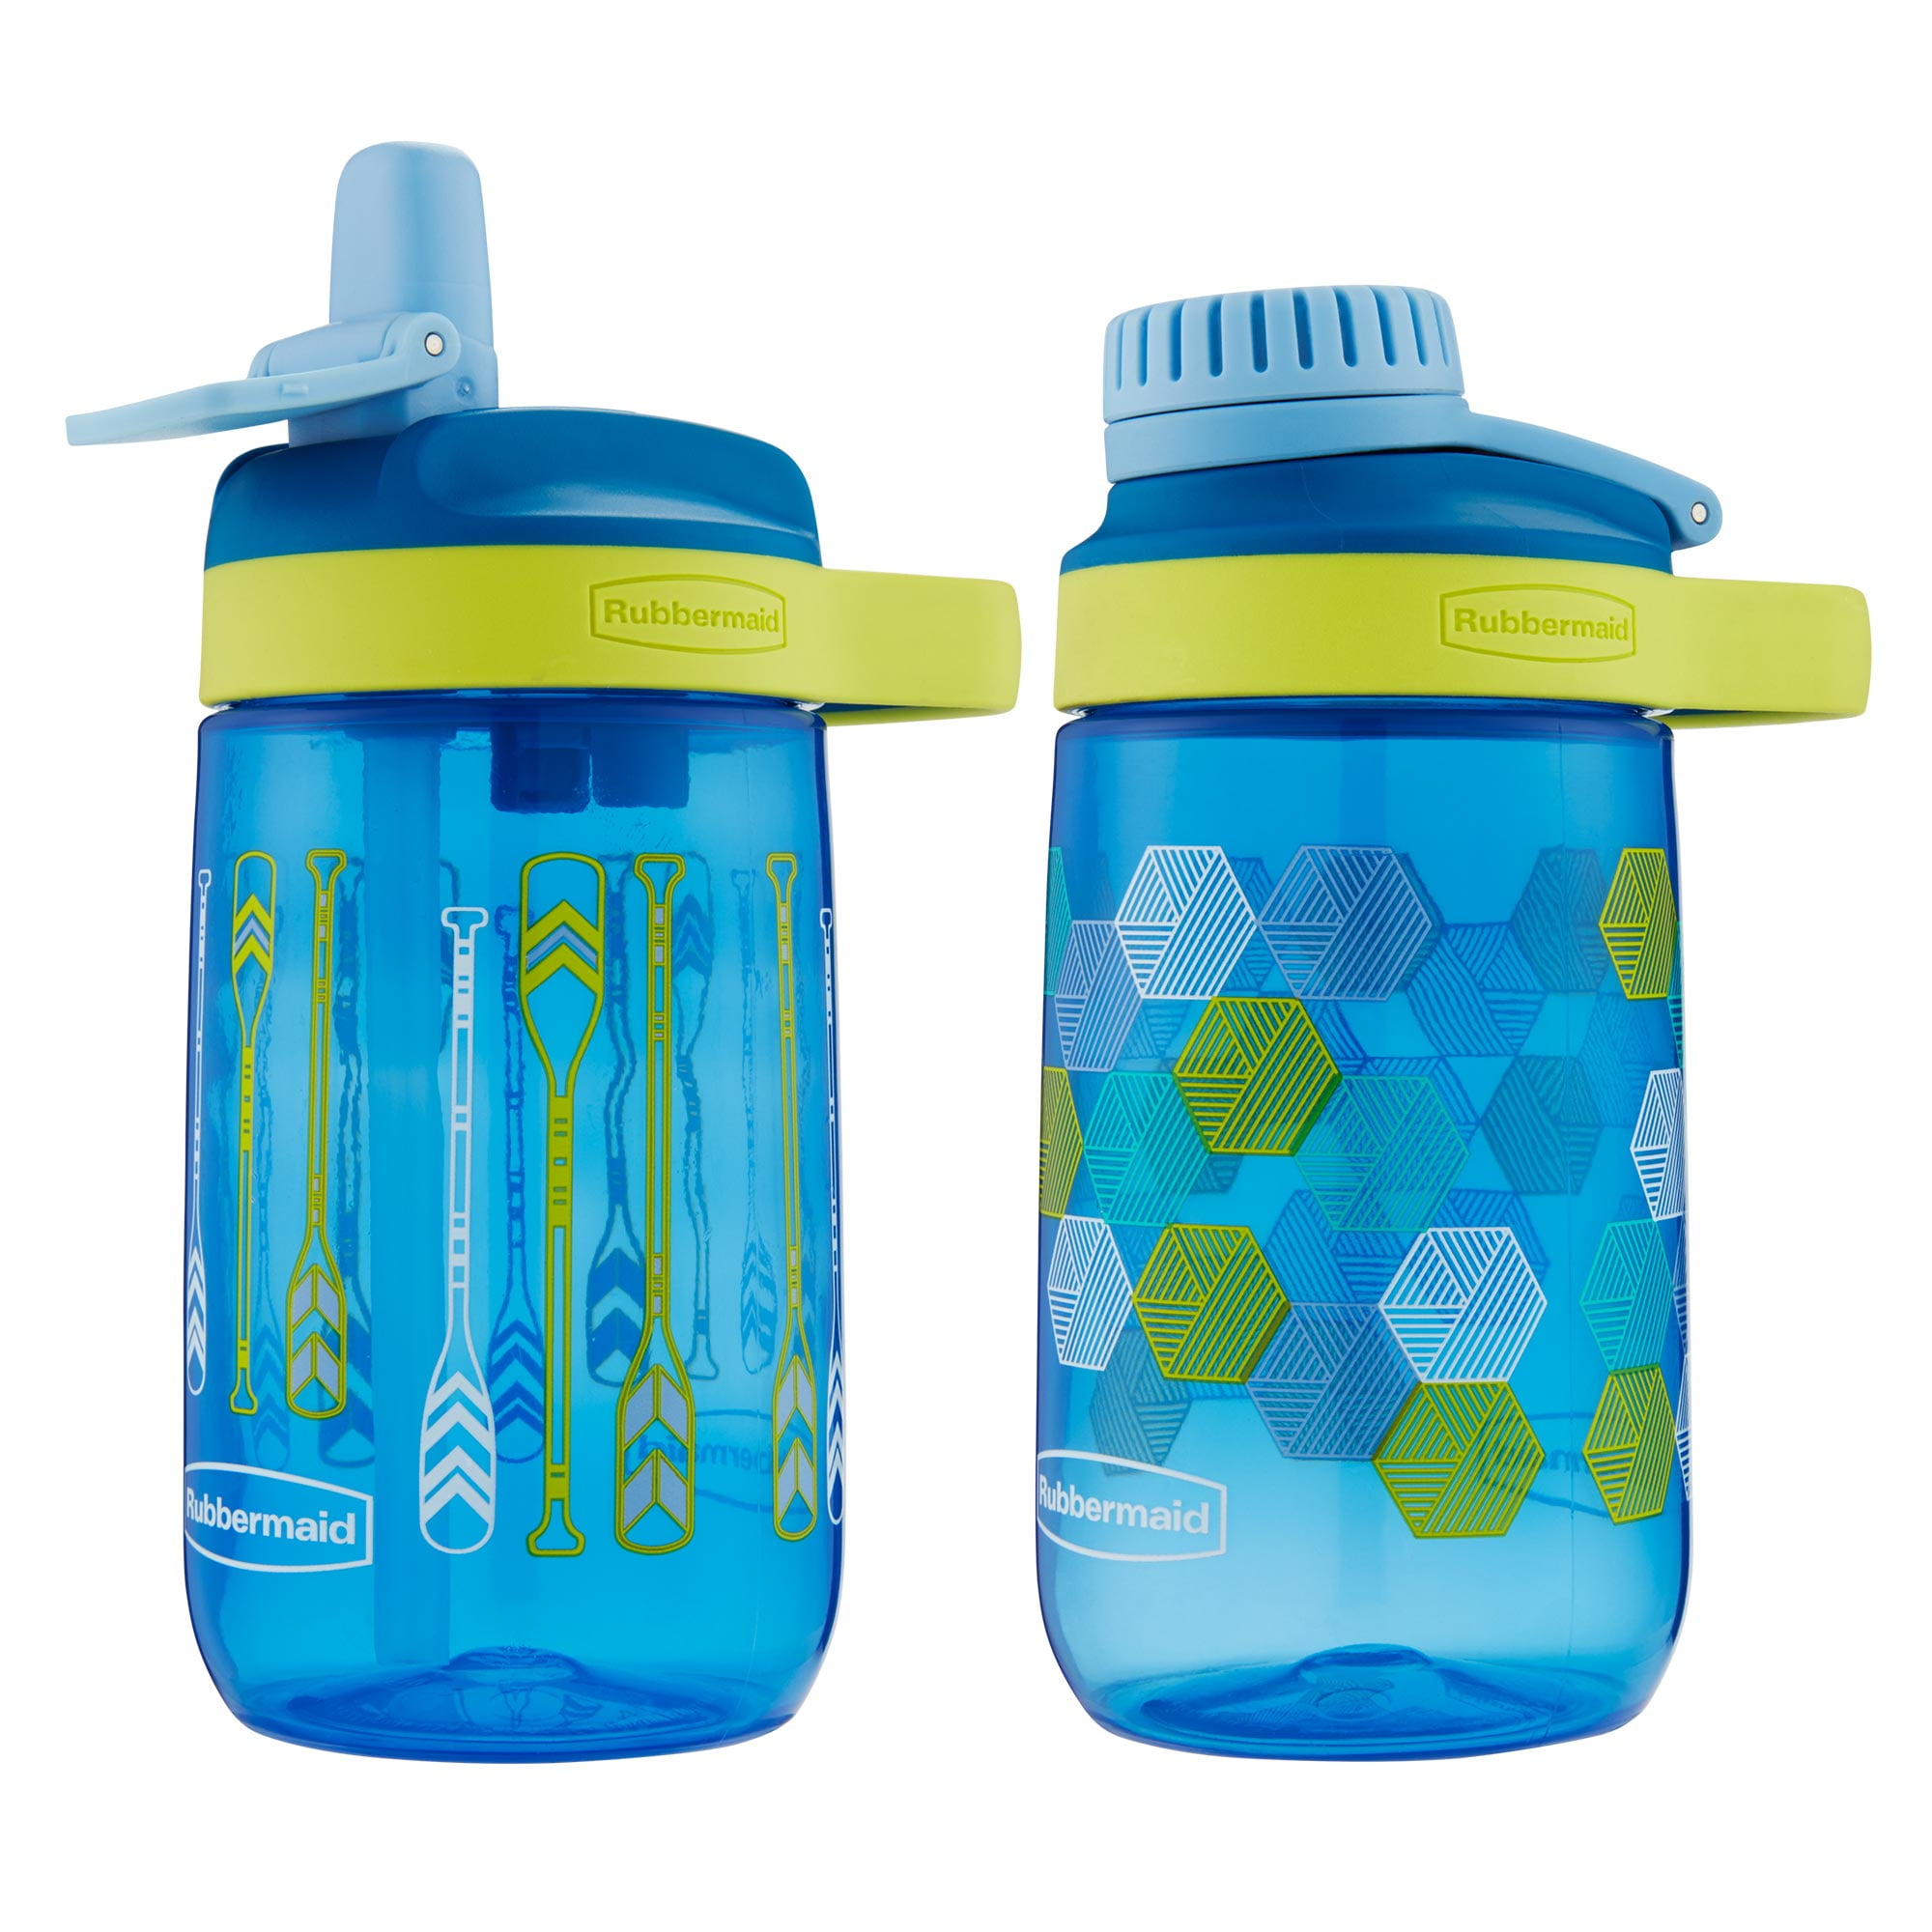 Where can I find these Rubbermaid water bottles? : r/HelpMeFind